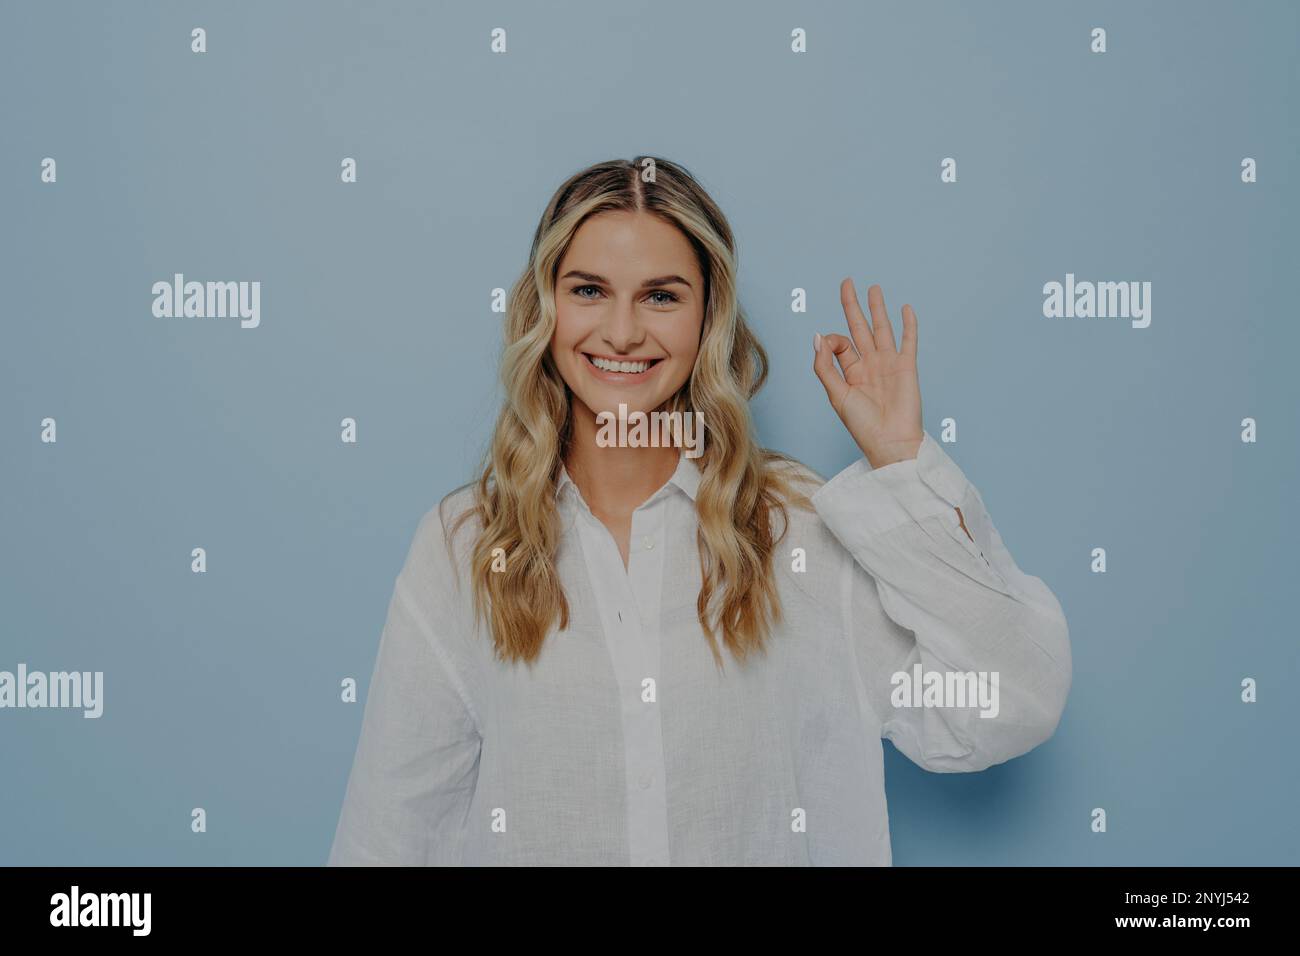 Joyful young blonde woman in white shirt making ok gesture with her hand in air, showing that everything is alright, signalling there is no problem wh Stock Photo